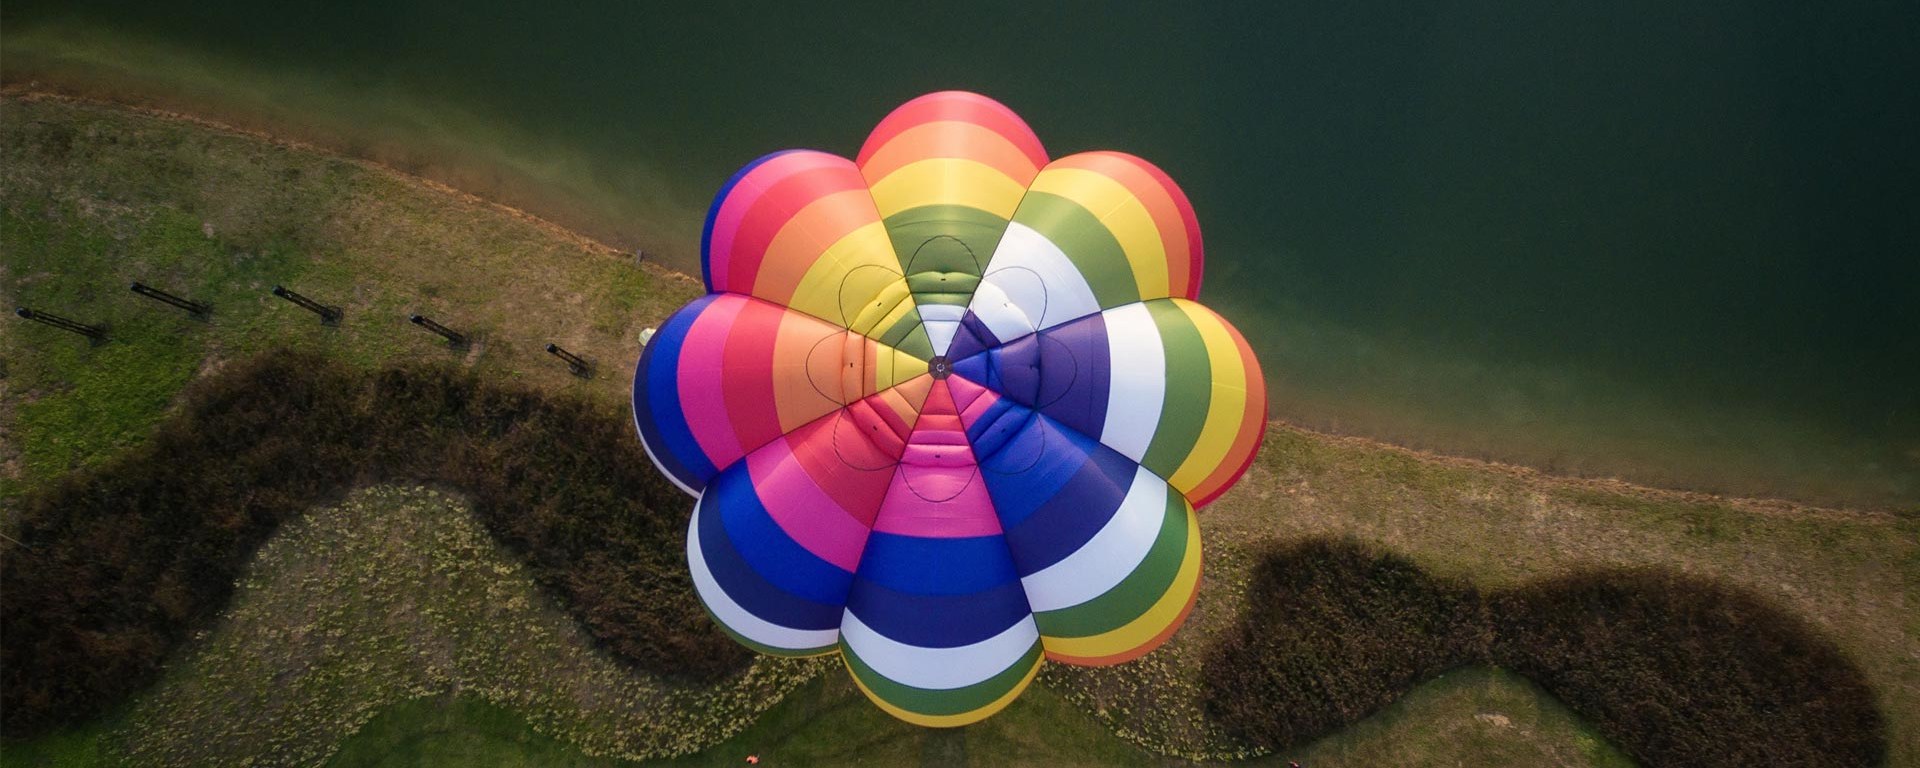 A colored hot air balloon is flying over a meadow - from a bird's eye view.